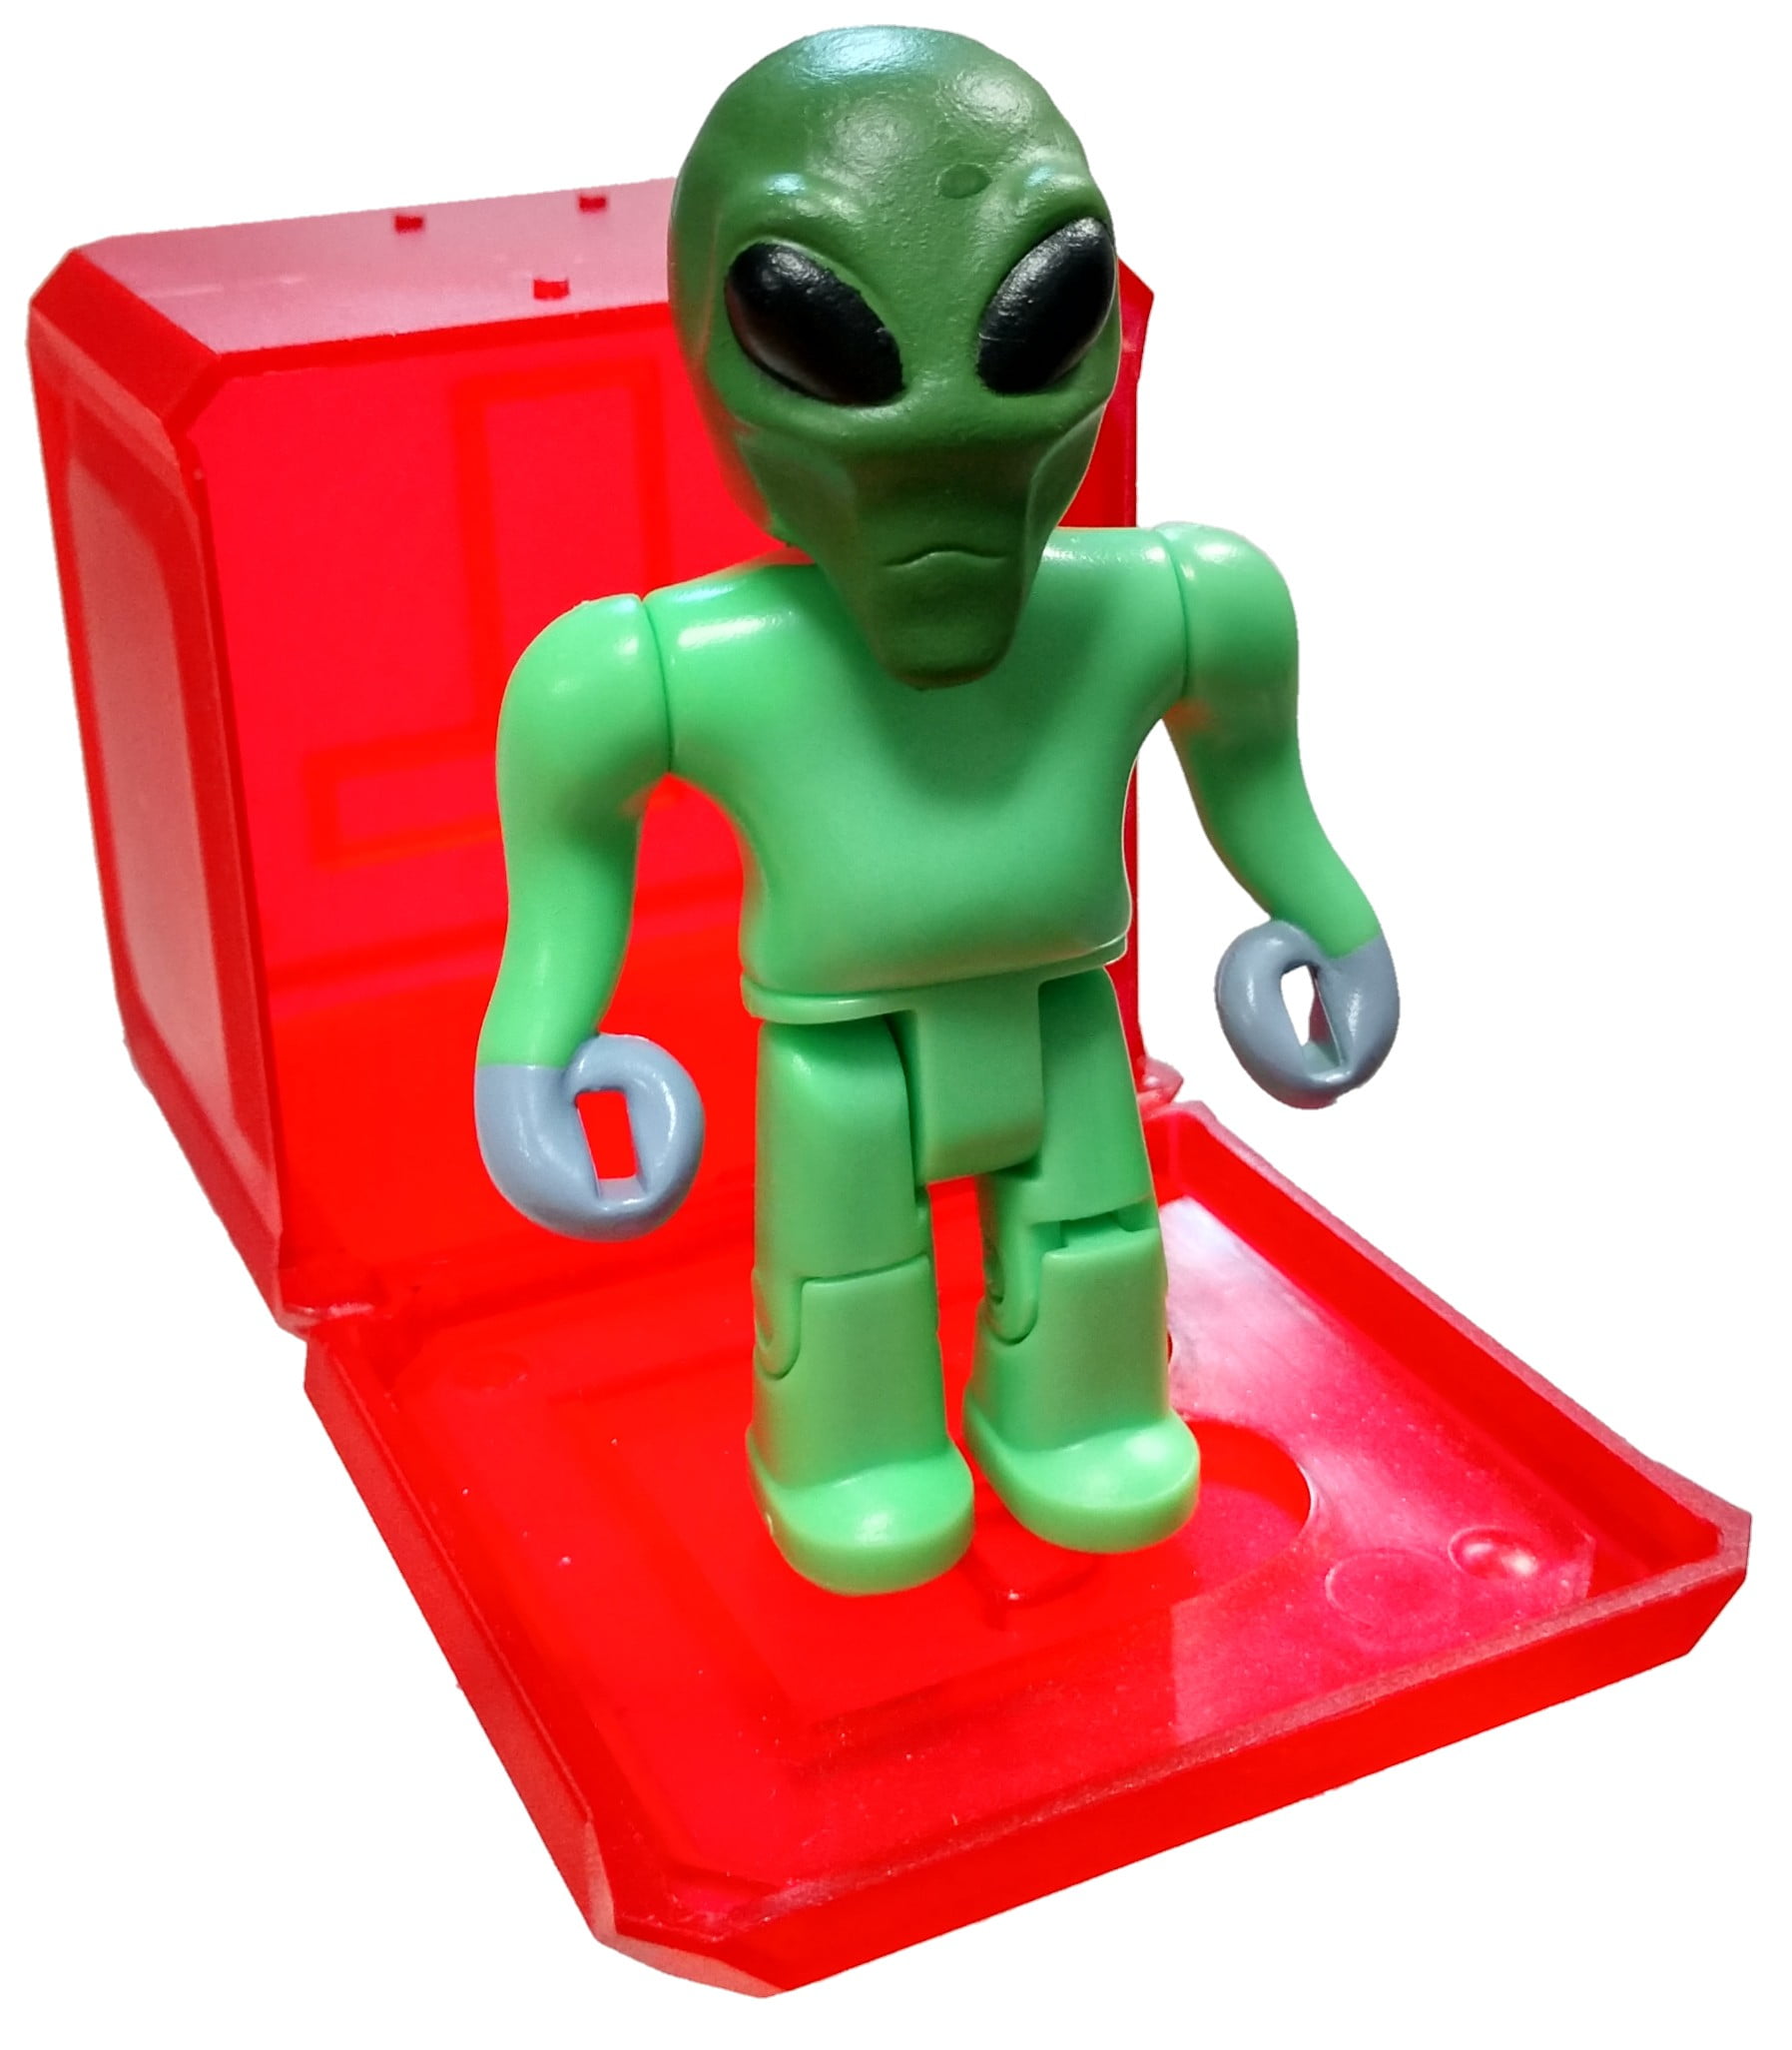 Roblox Celebrity Collection Series 5 Pinewood Alien Mini Figure With Red Cube And Online Code No Packaging Walmart Com Walmart Com - roblox alien games